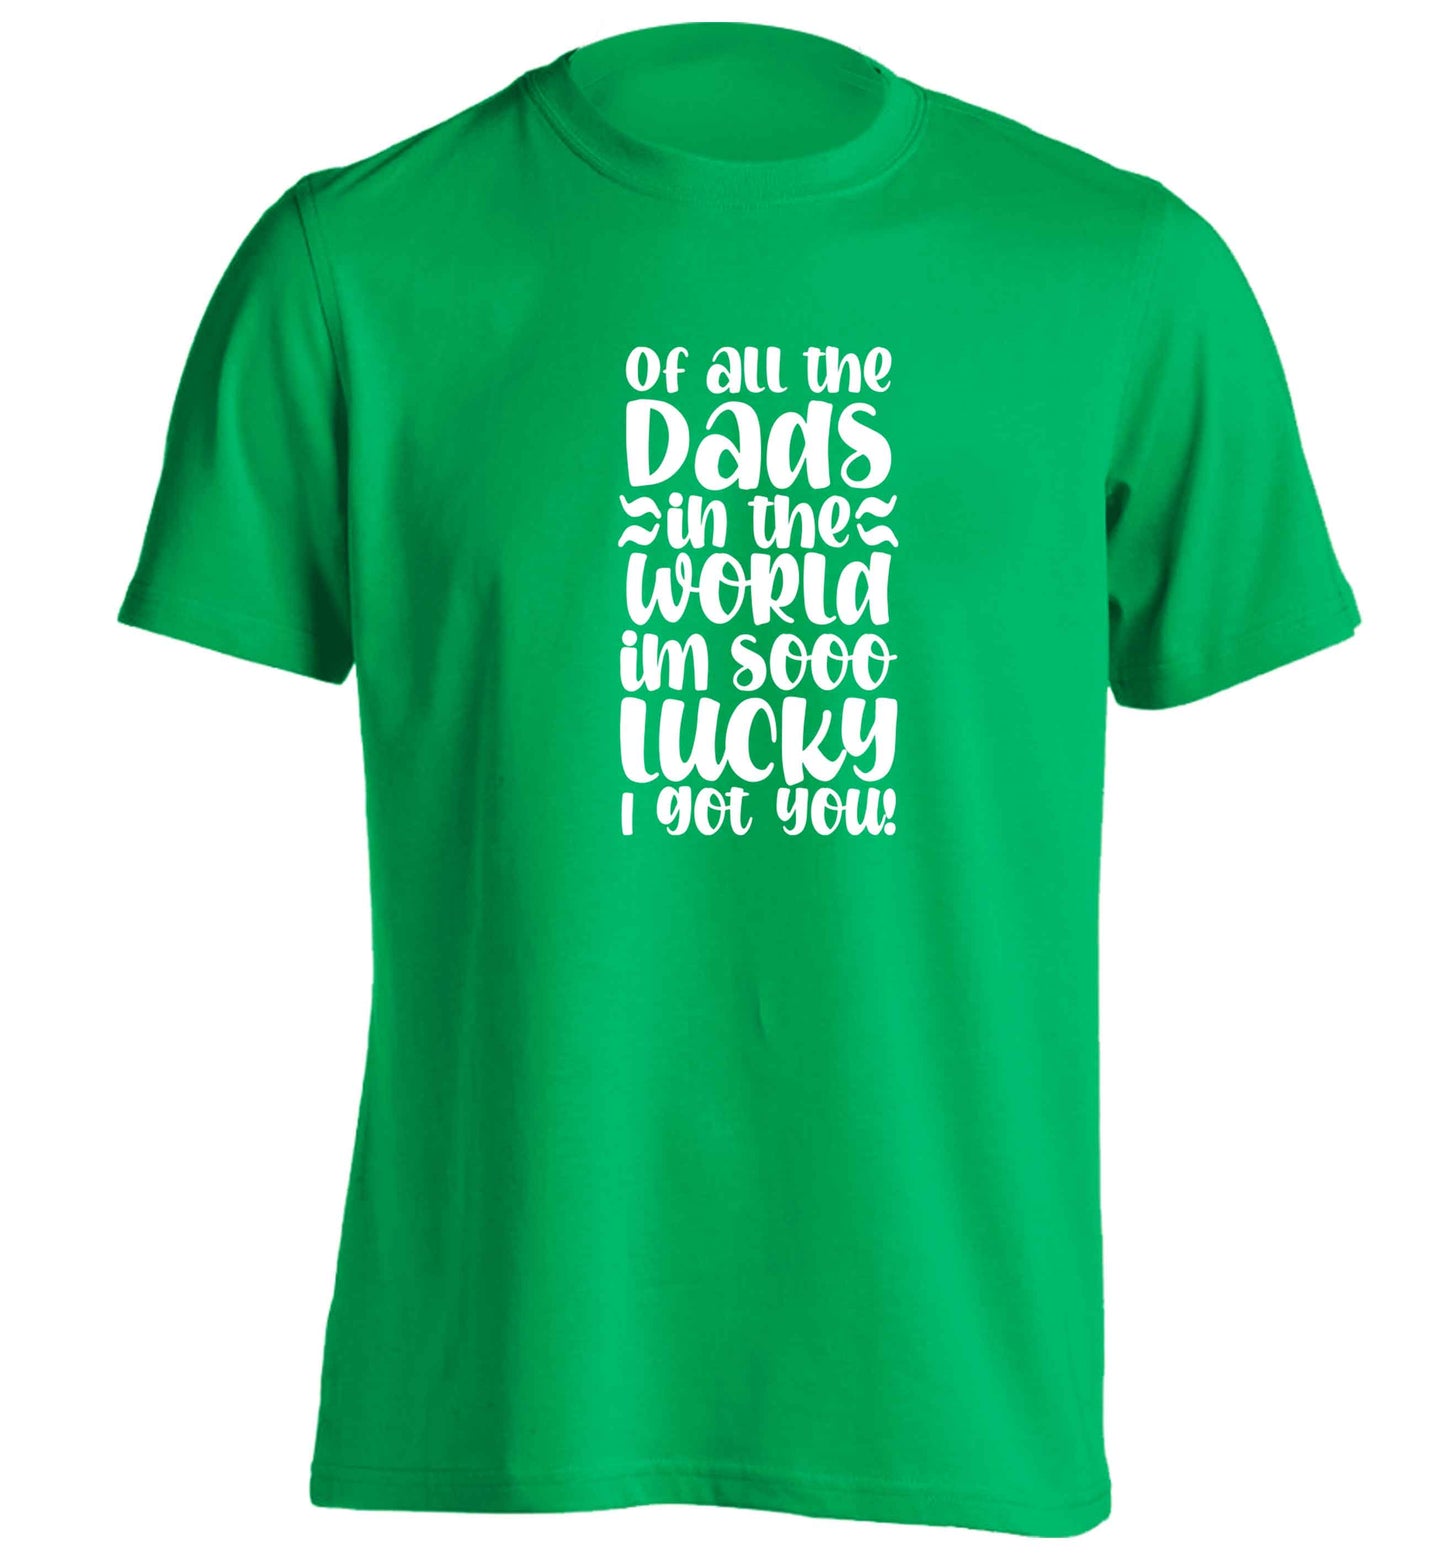 Of all the Dads in the world I'm so lucky I got you adults unisex green Tshirt 2XL